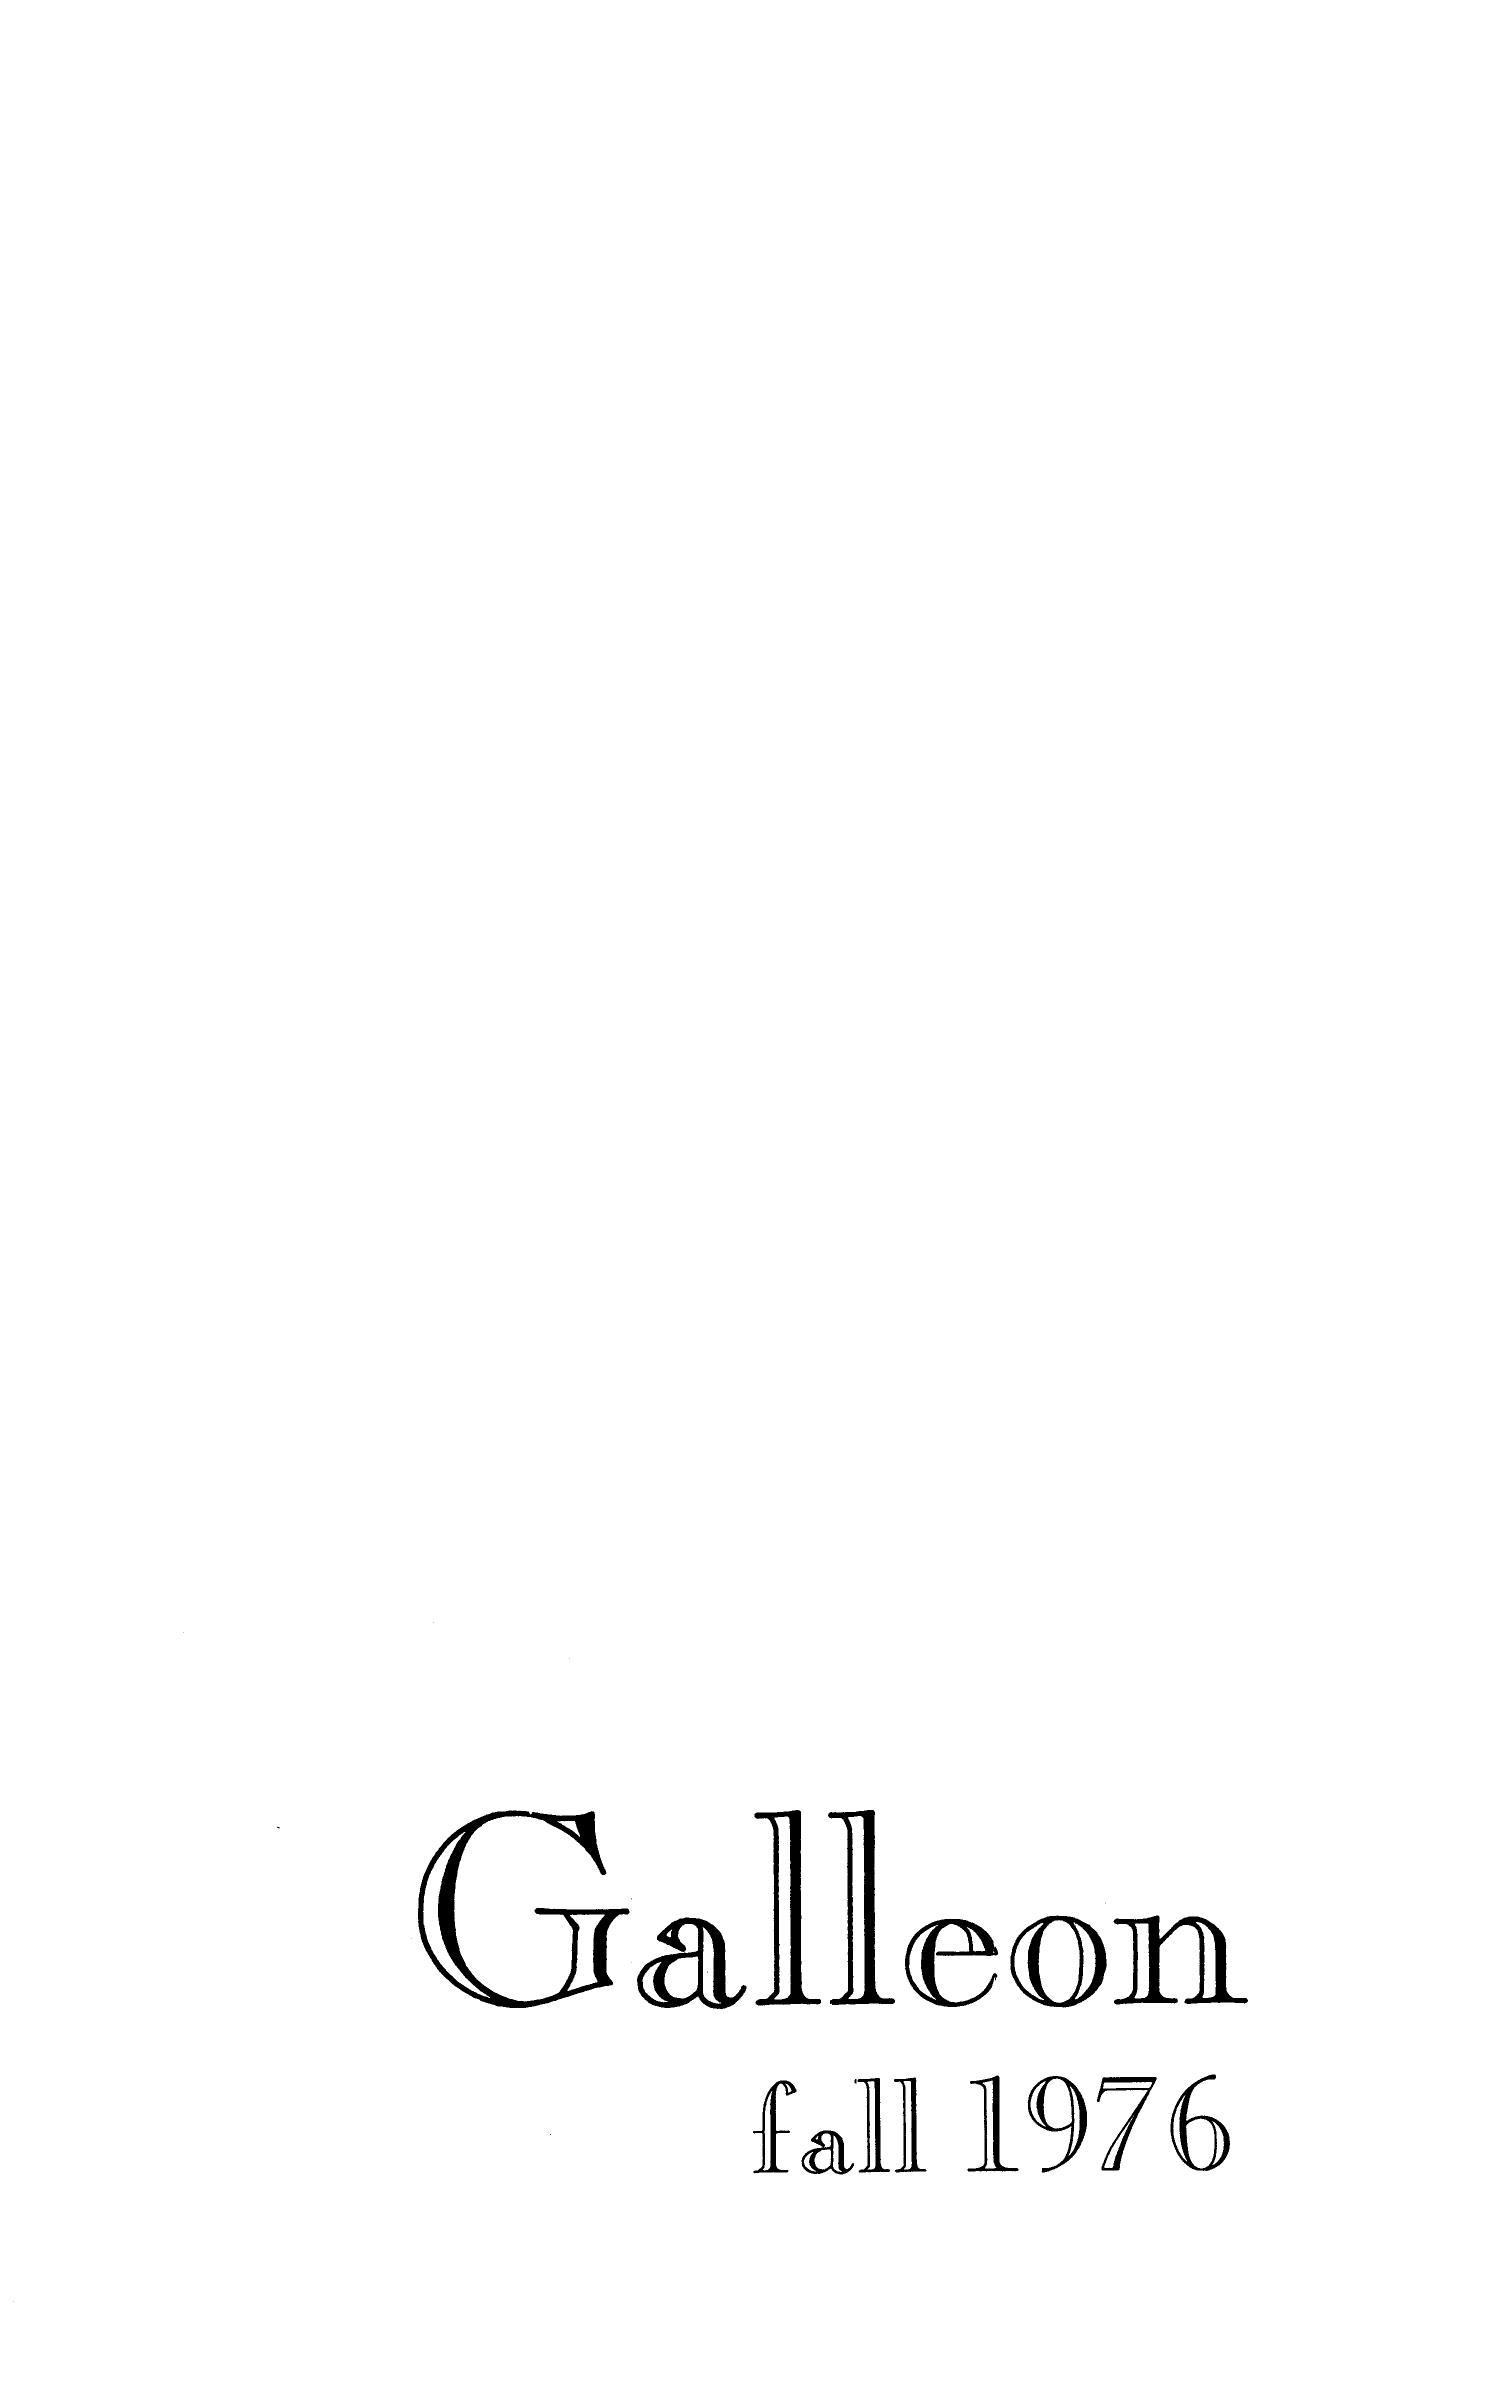 The Galleon, Volume 52, Number 1, Fall 1976
                                                
                                                    None
                                                